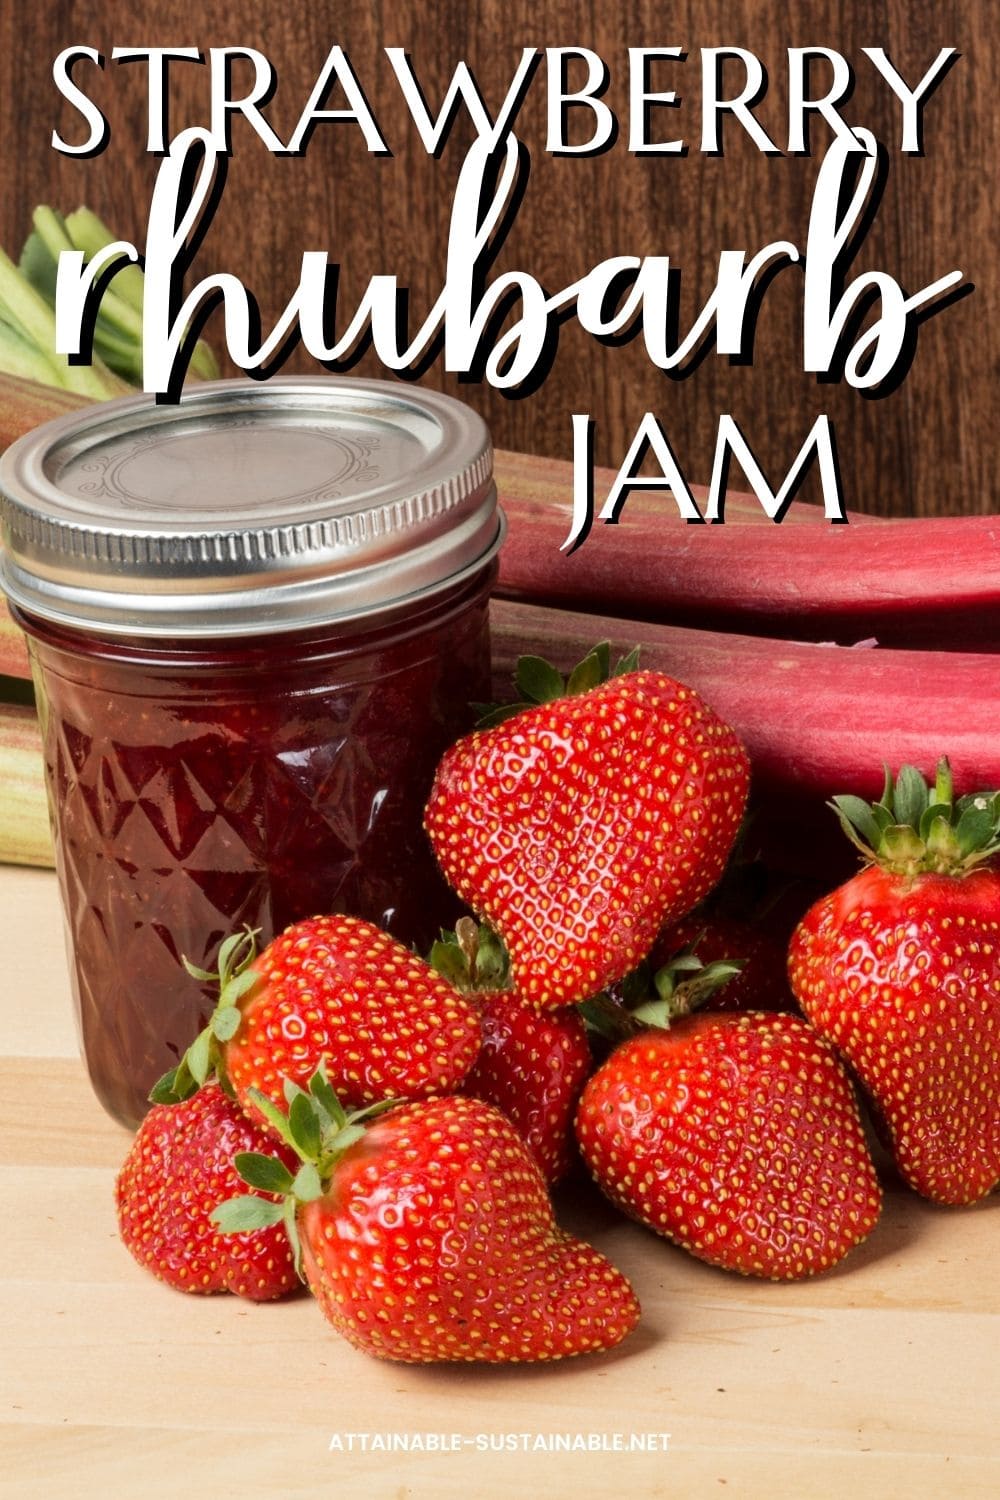 strawberries and rhubarb with a jar of jam.